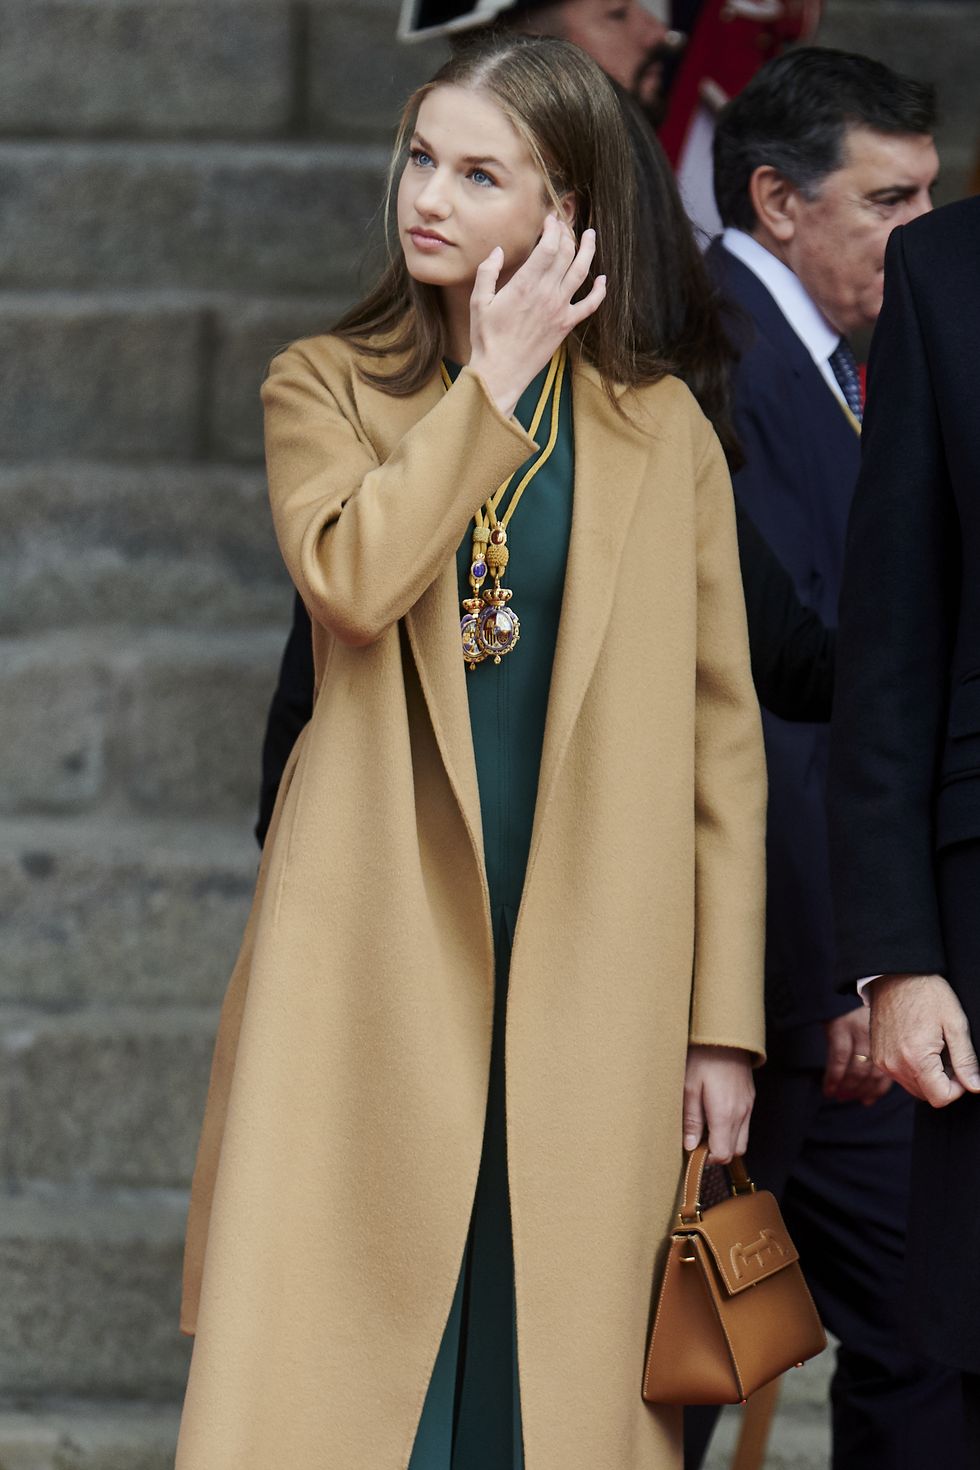 spanish royals attend the opening of the parliament